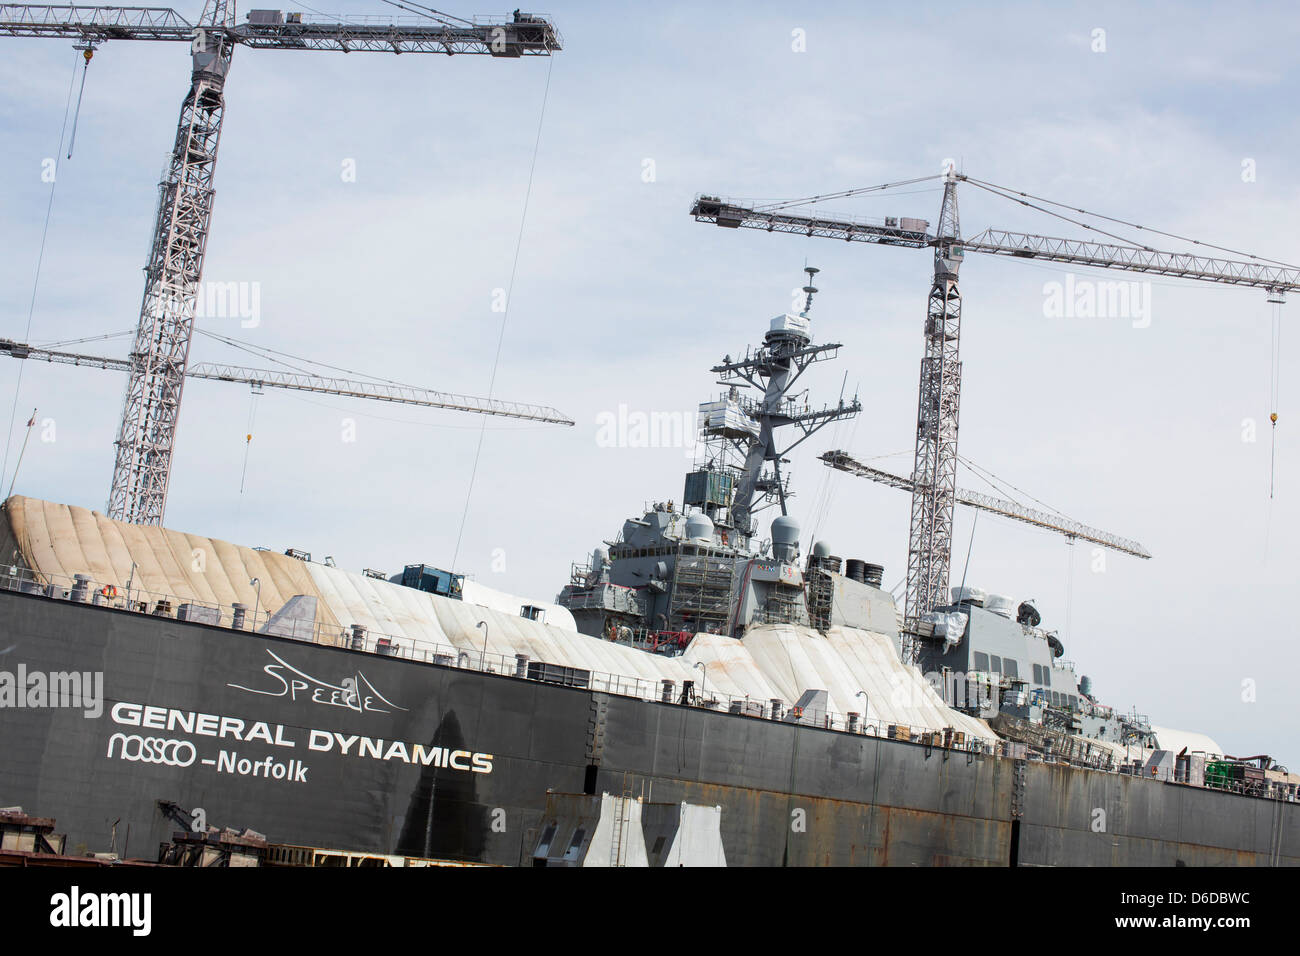 An Arleigh Burke class destroyer can be seen in a repair dry dock at the General Dynamics NASSCO shipyard in Norfolk, Virginia Stock Photo